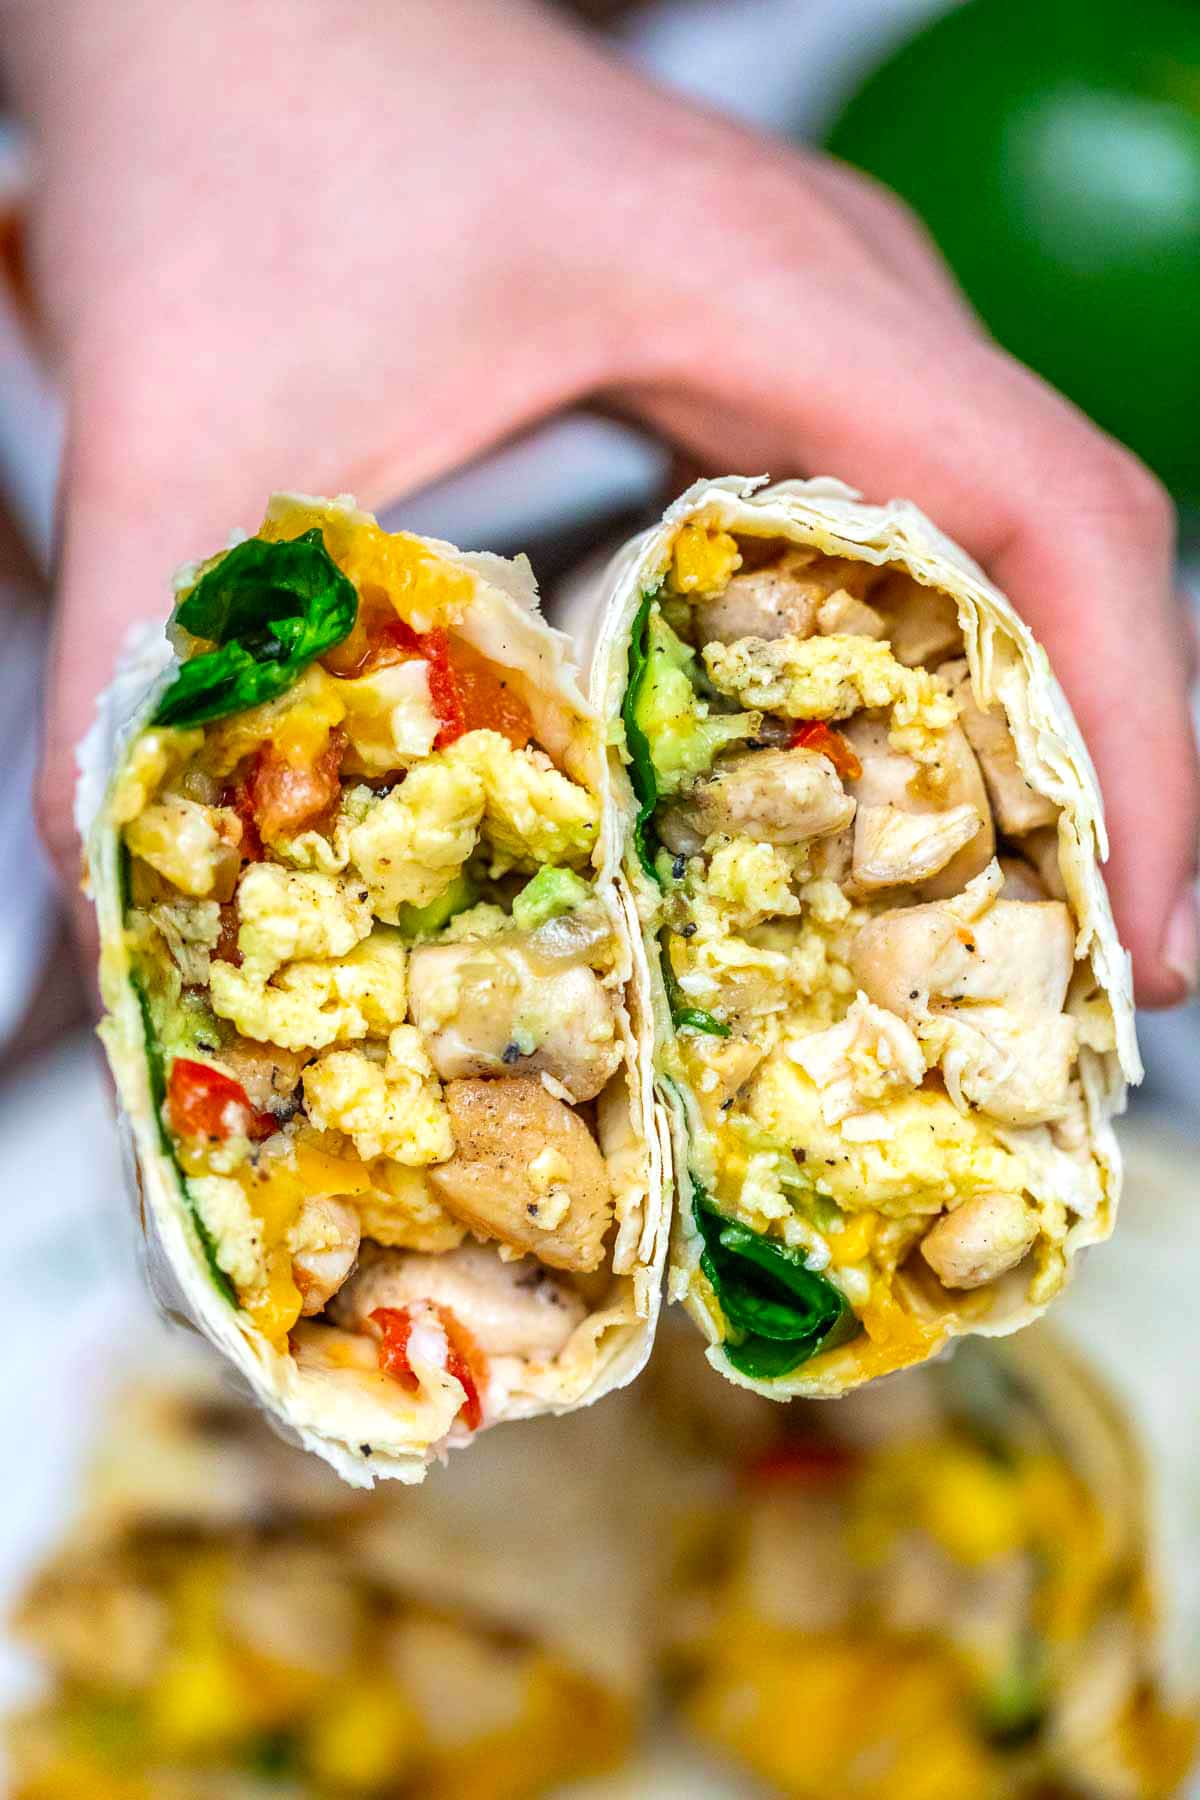 Make Breakfast Burritos Quickly and Easily